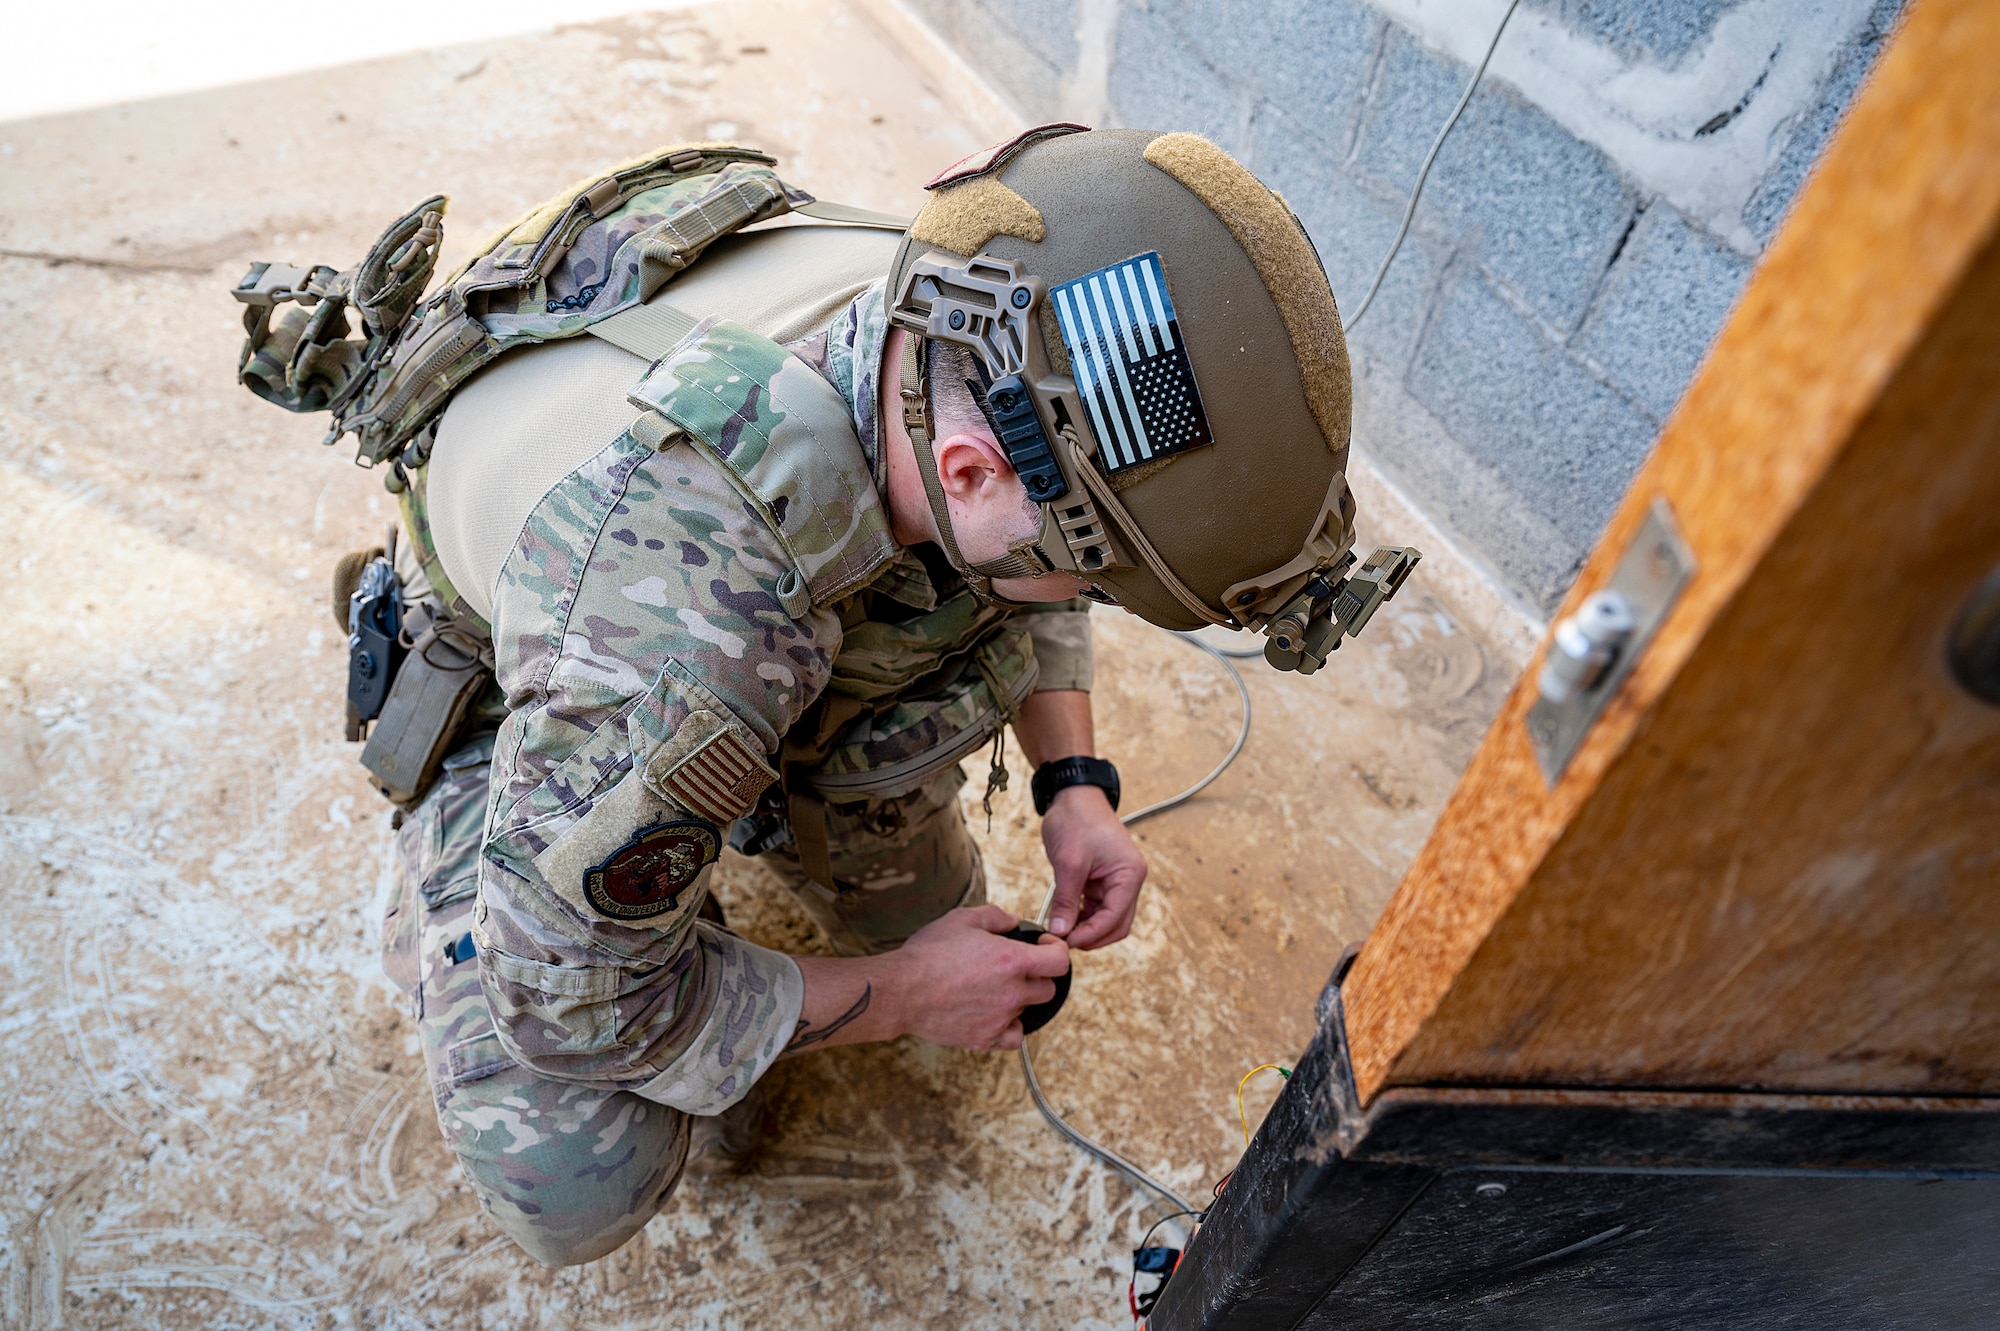 U.S. Air Force Staff Sgt. Ryan Melody, 380th Expeditionary Civil Engineer Squadron explosive ordnance disposal (EOD) technician, defuses a simulated explosive during a joint training event at Al Dhafra Air Base, United Arab Emirates, Jan. 28, 2021.